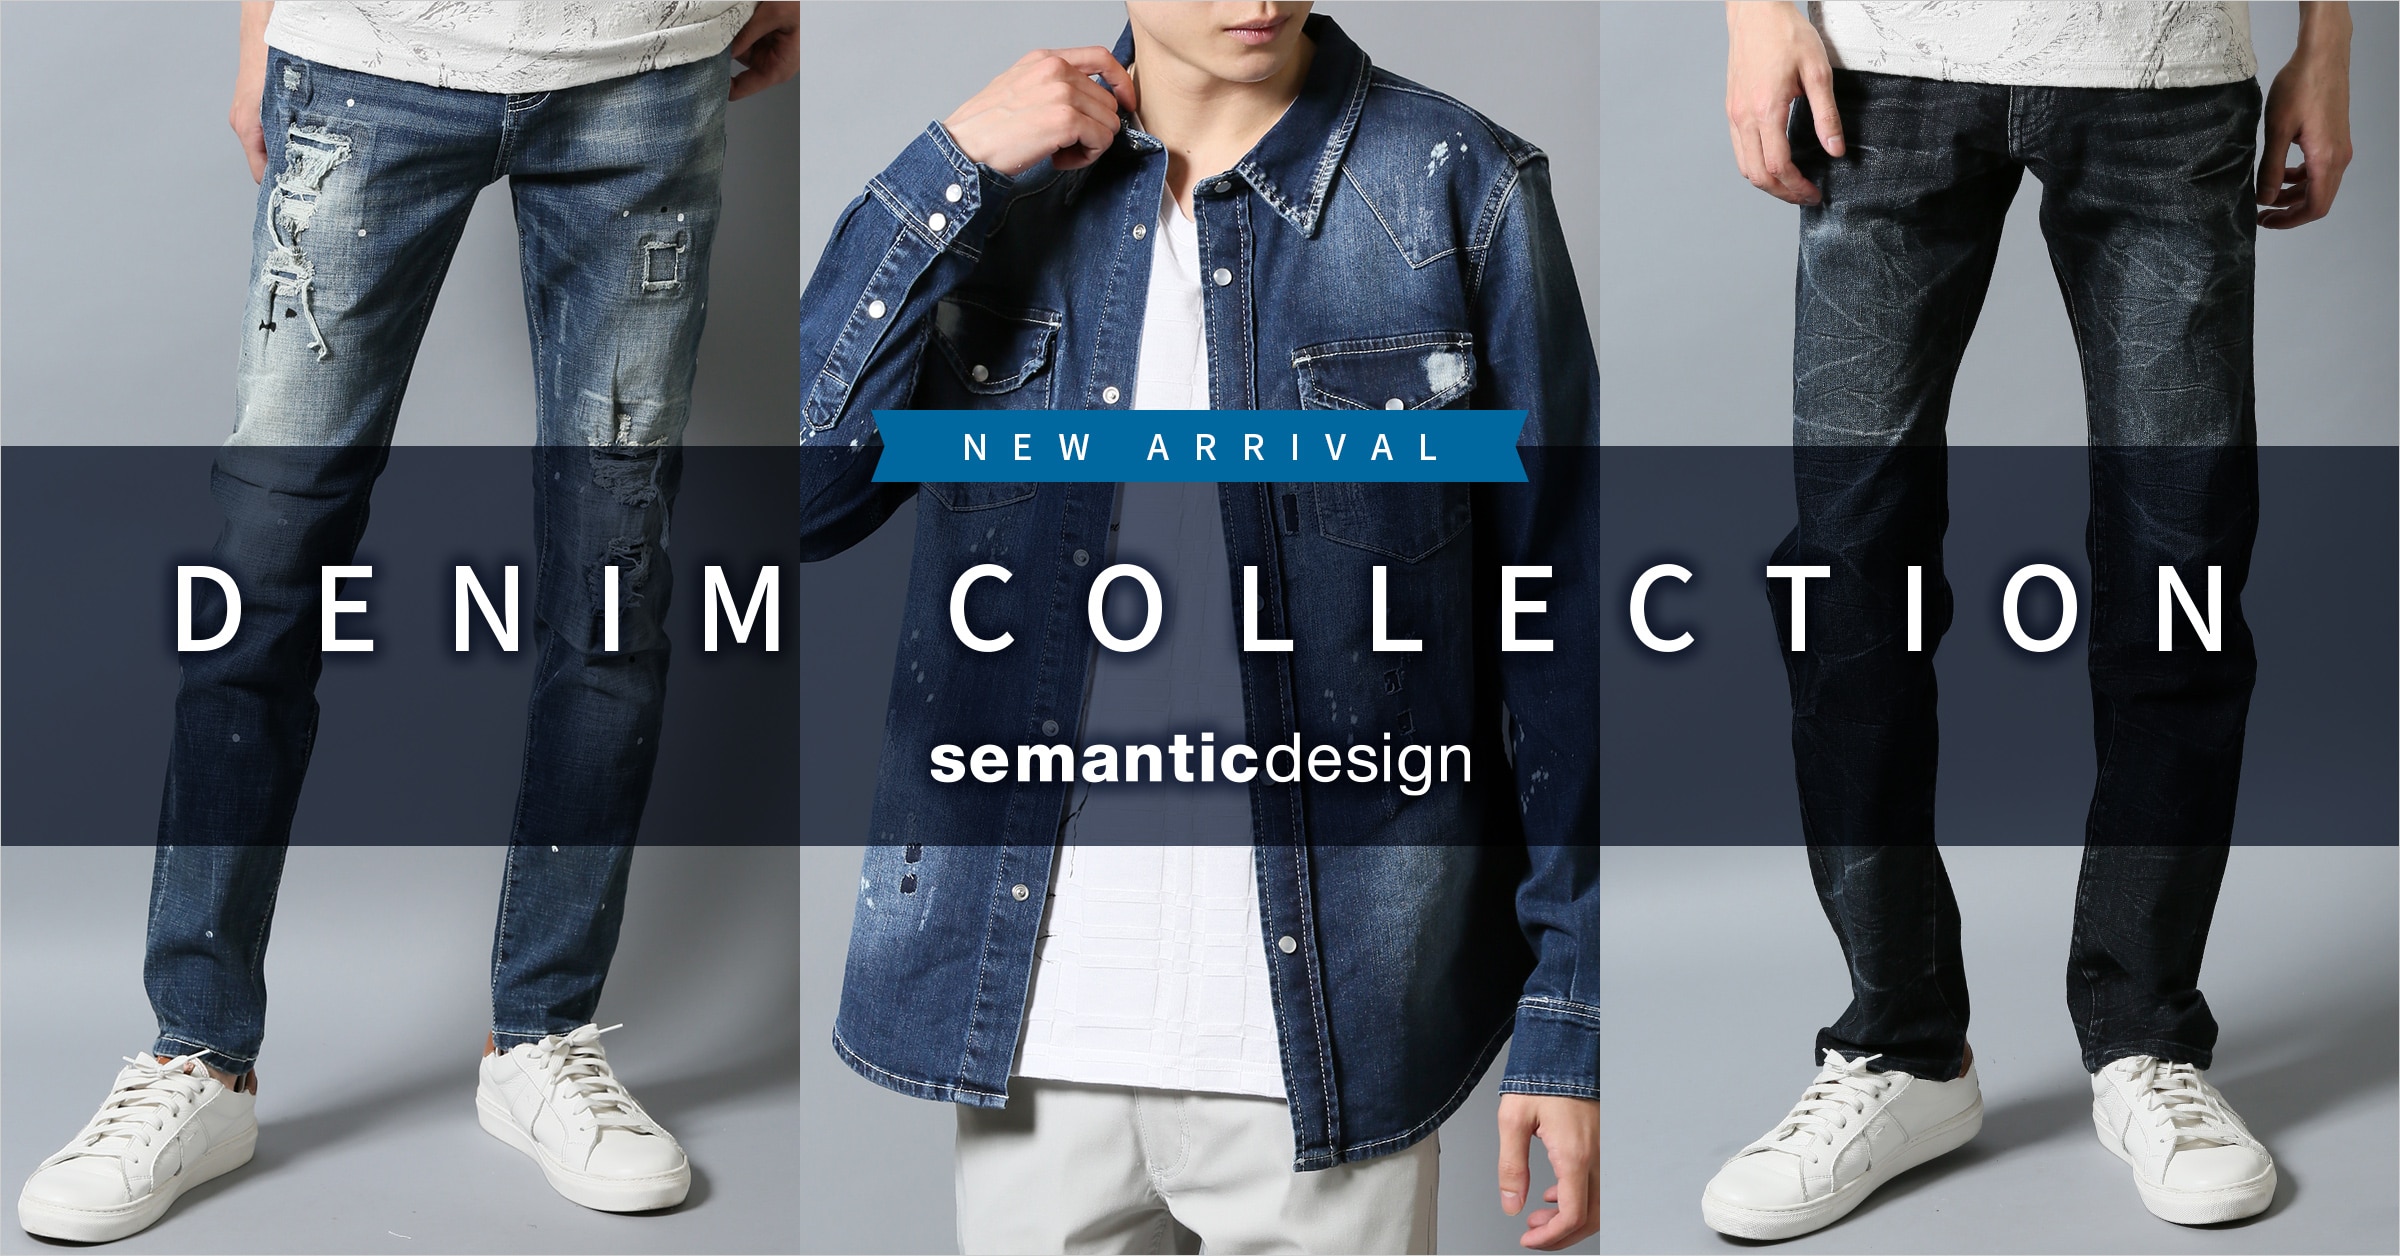 NEW ARRIVAL DENIM COLLECTION